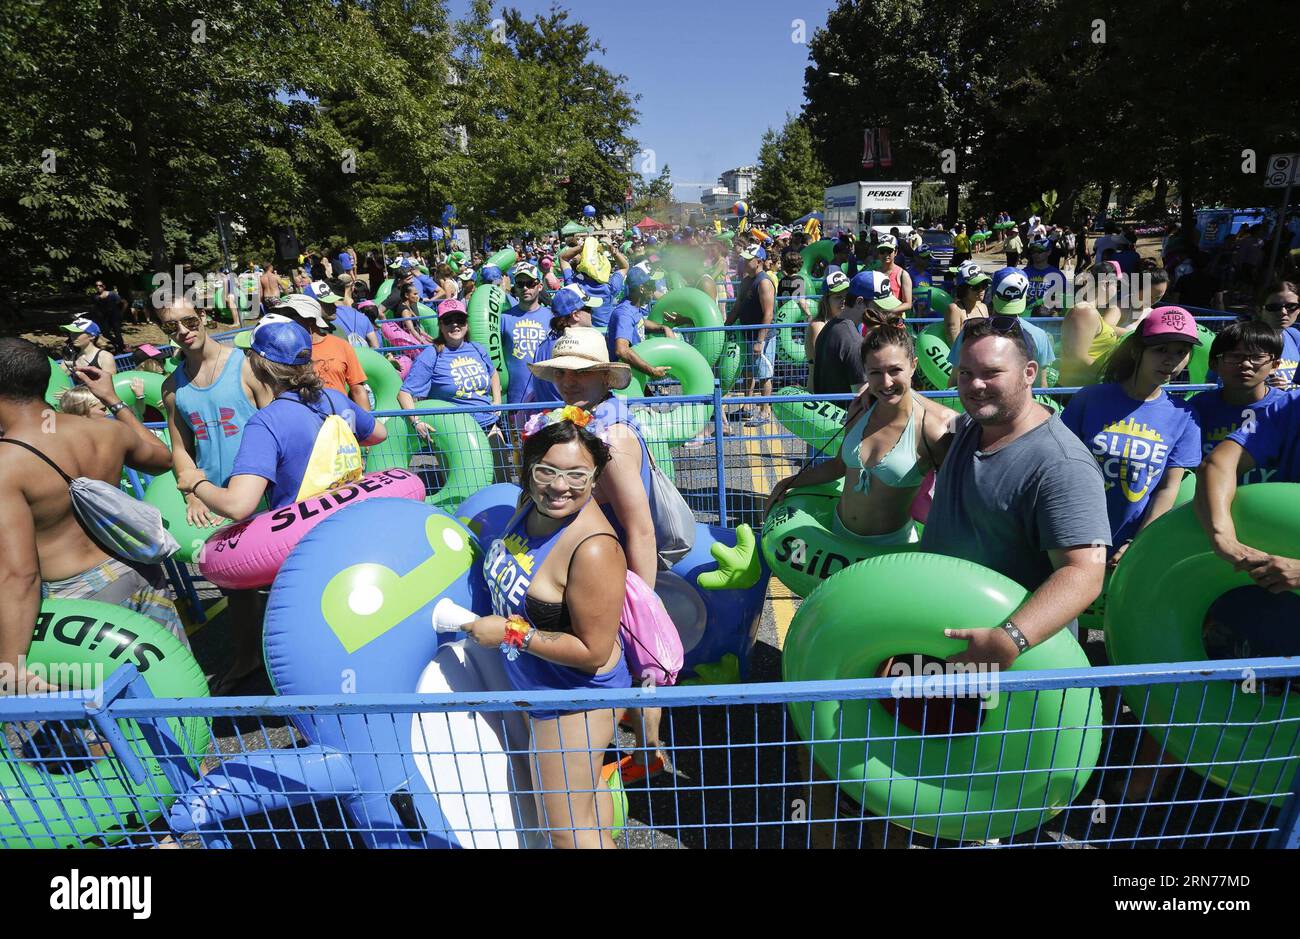 Participants line up for an hour to wait for their turn during the Slide  the city event held at a closed street in North Vancouver, Canada, Aug. 22,  2015. Slide the city